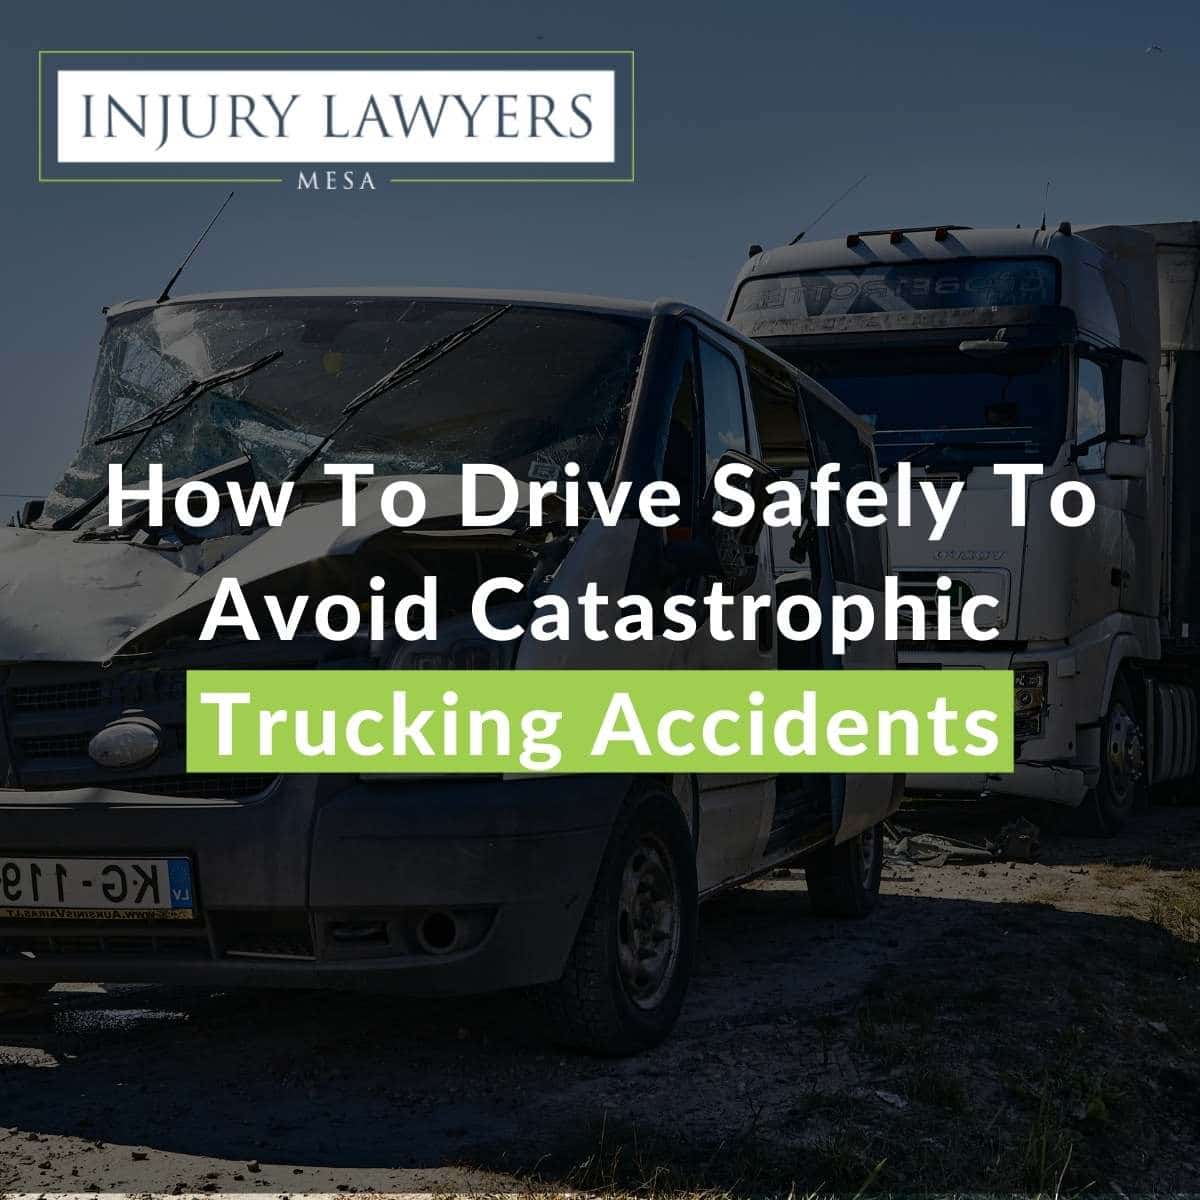 How To Drive Safely To Avoid Catastrophic Trucking Accidents